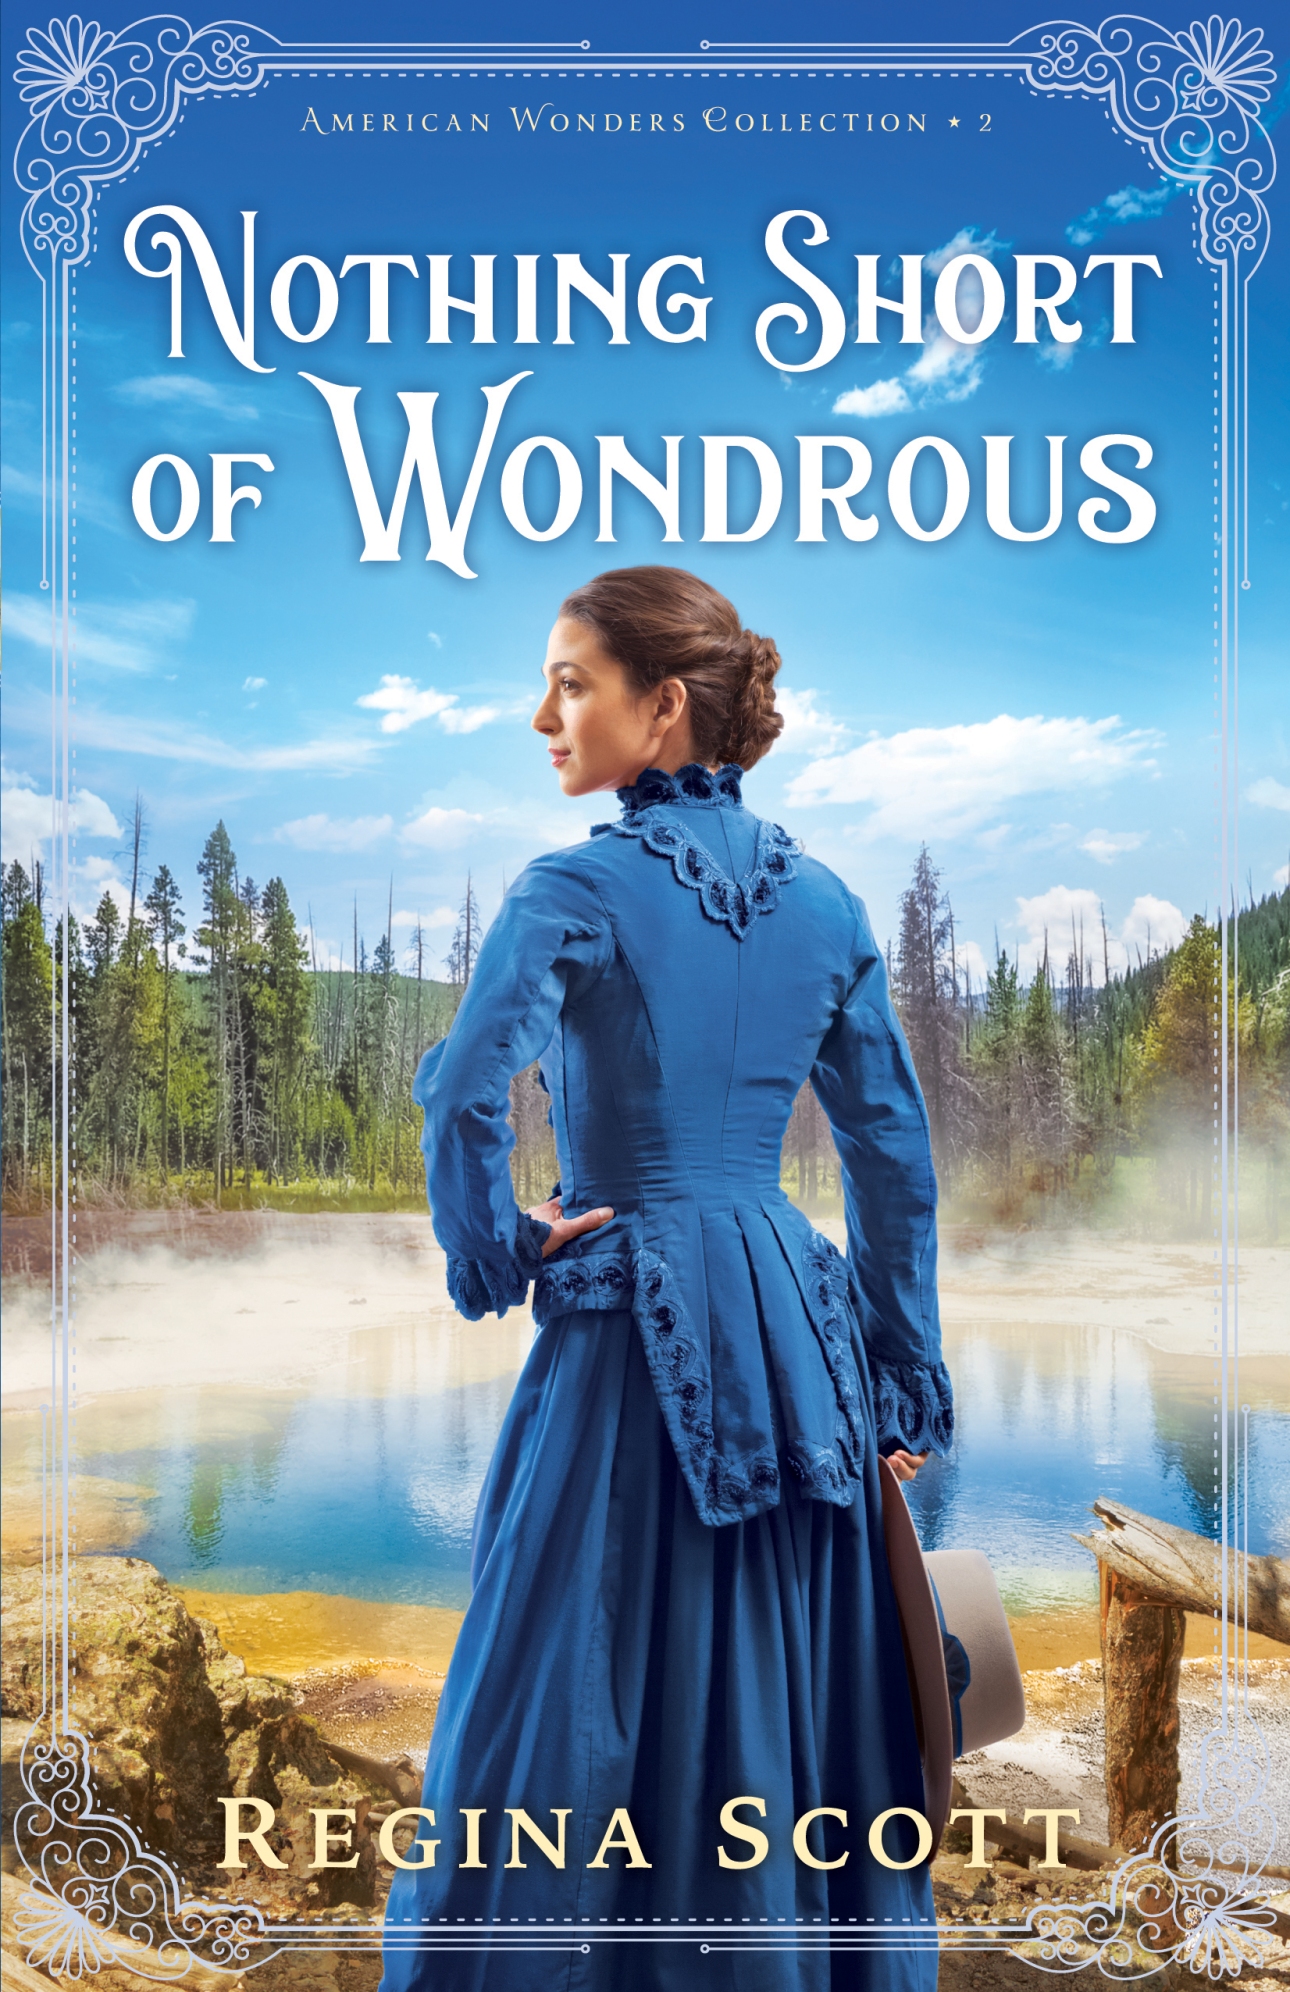 American Wonders Collection Book 2 Cover Image Nothing Short of Wondrous Title